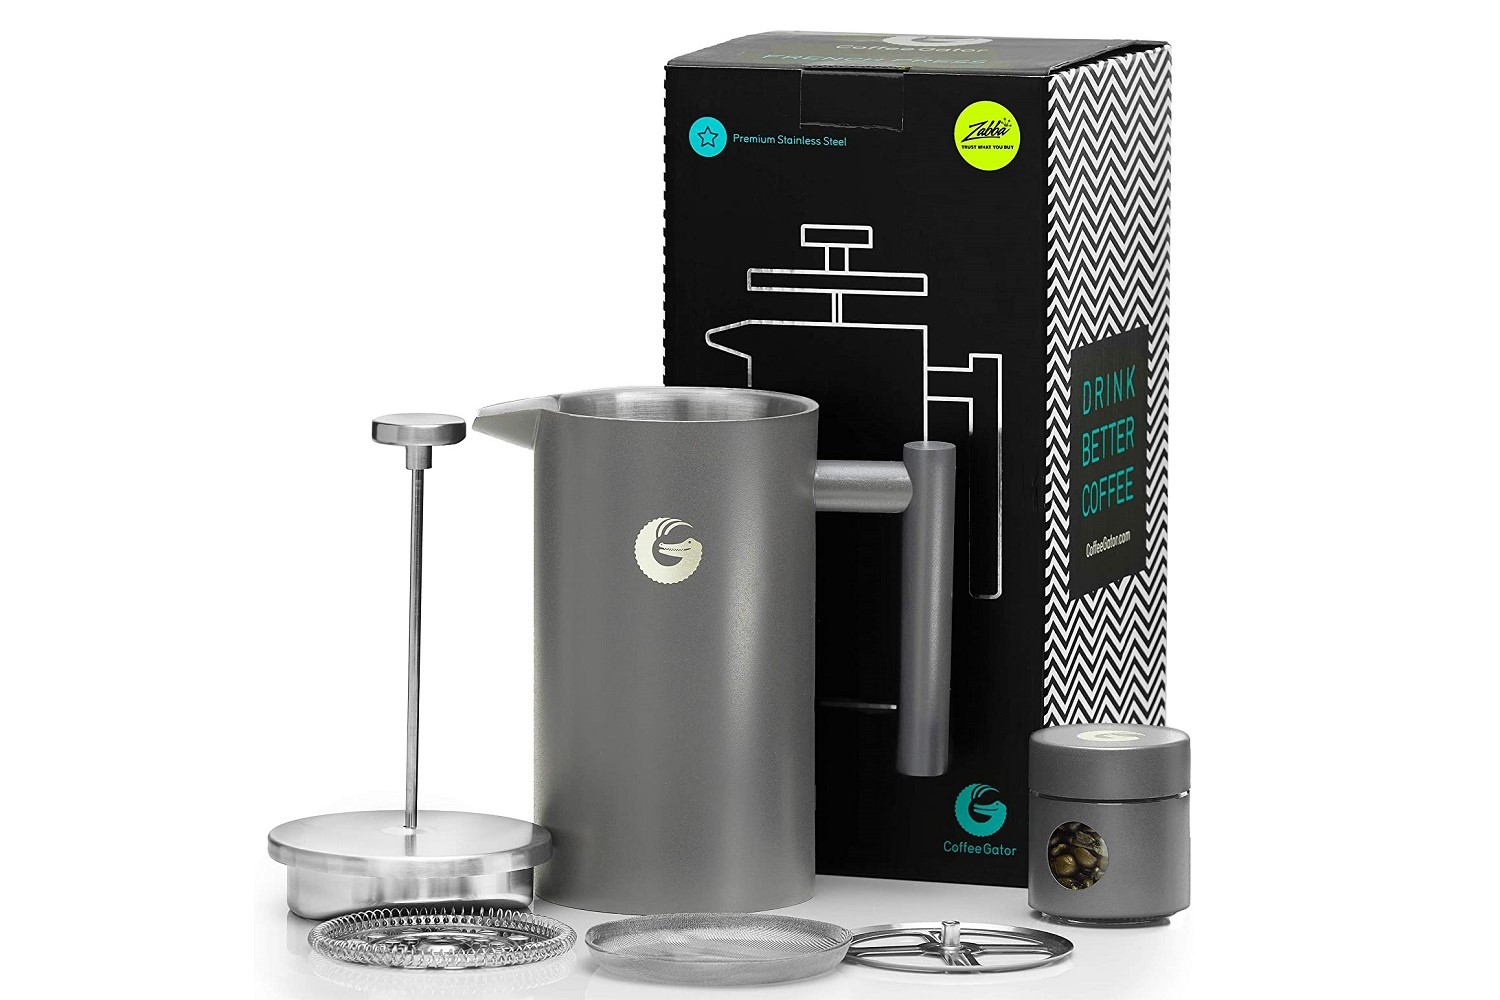 Coffee Gator French Press Coffee Maker, Thermal Insulated Brewer